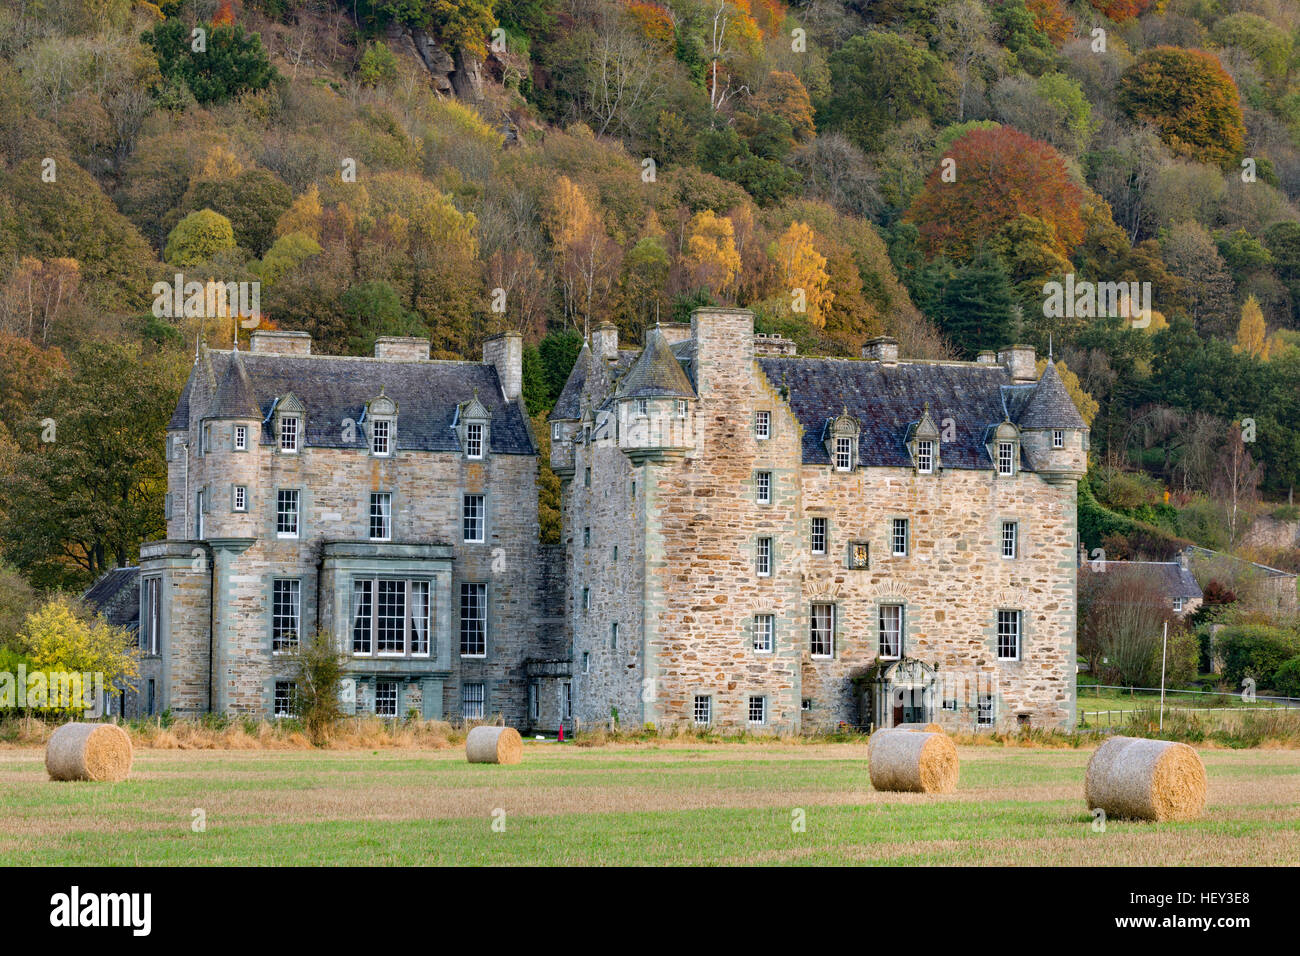 Castle Menzies, Weem, Pertshire, with hay bales in the fireground and a woodland in Autumn colours in the background. Stock Photo